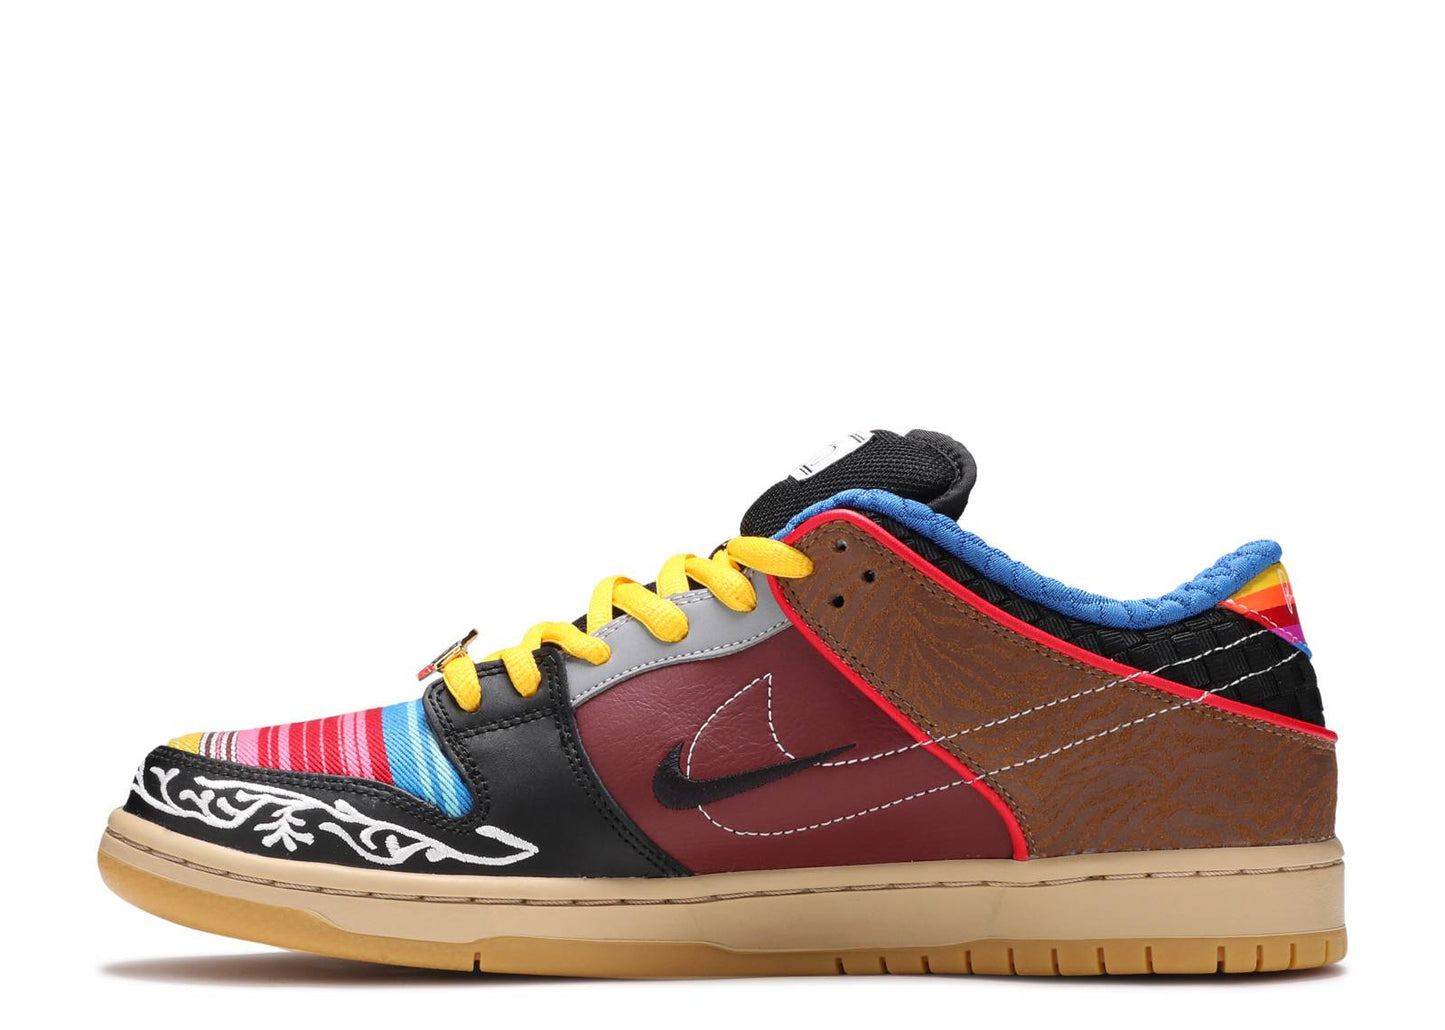 Nike SB Dunk Low Pro QS "What The Paul"